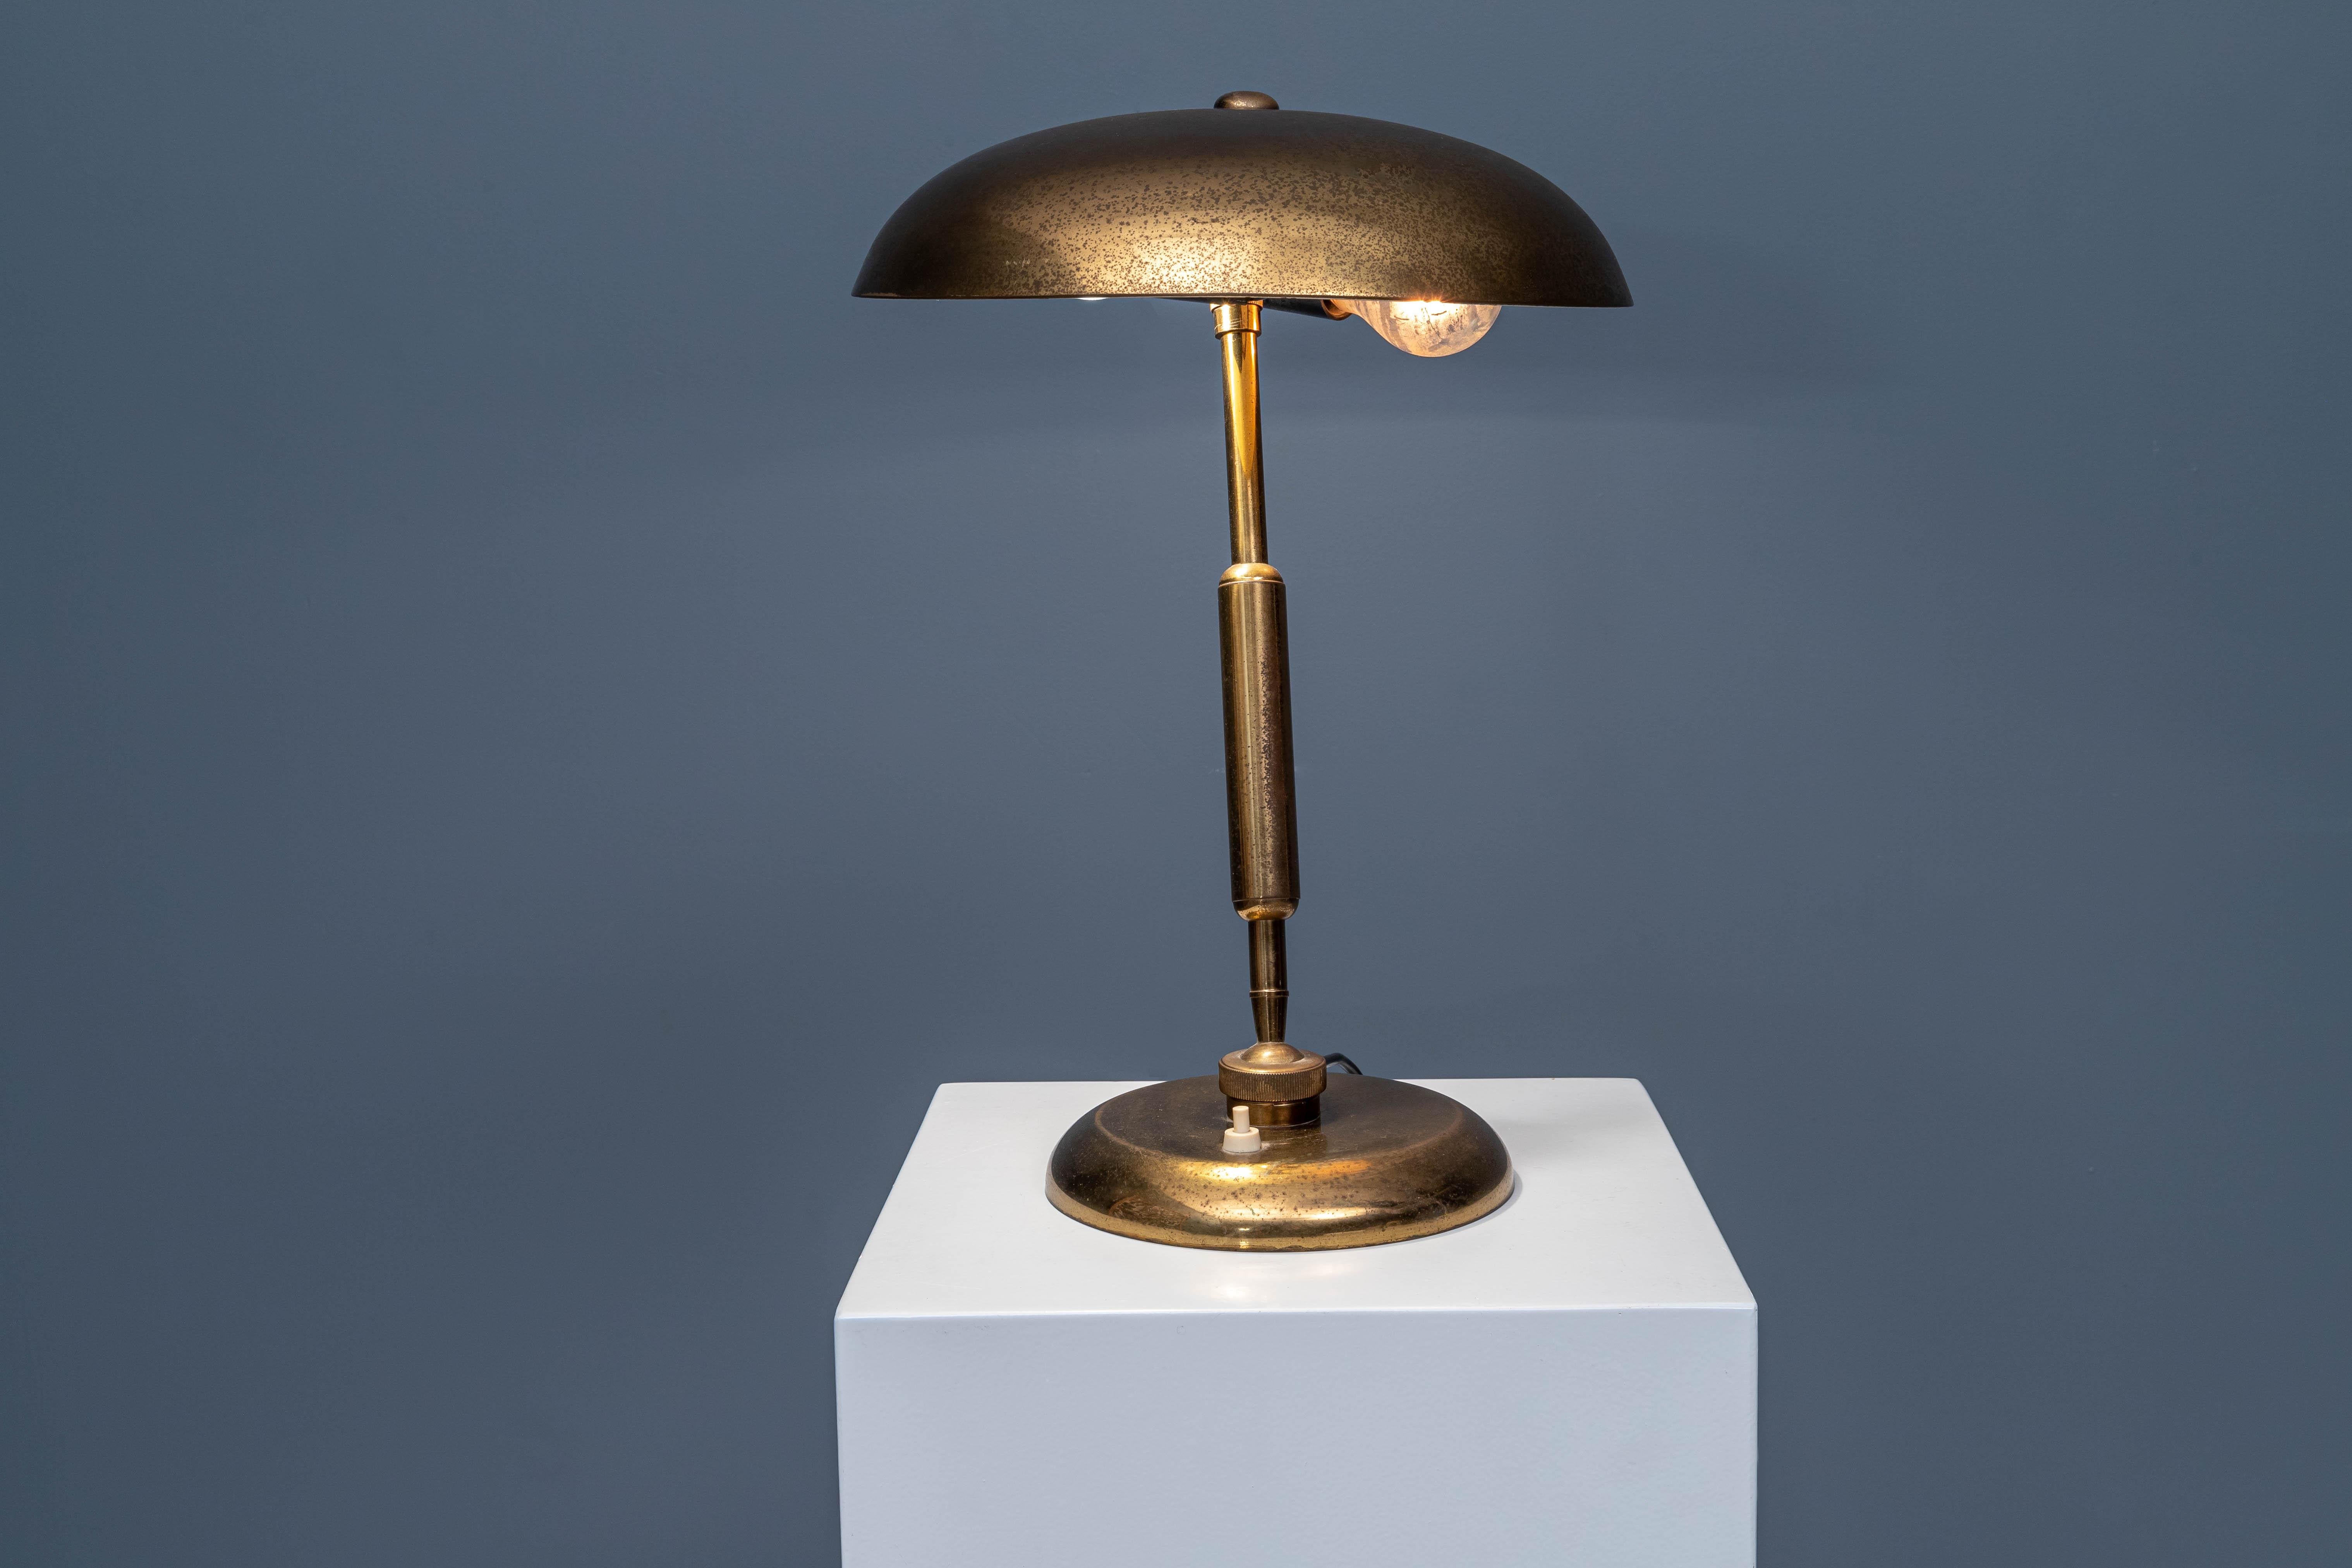 Classic table lamp by Giovanni Michelucci in brass. We left the brass as it is because we like it this way, but if you wish we can polish it a bit to make it more shiny and get the larger spots out. The lamp is in perfect working order and all